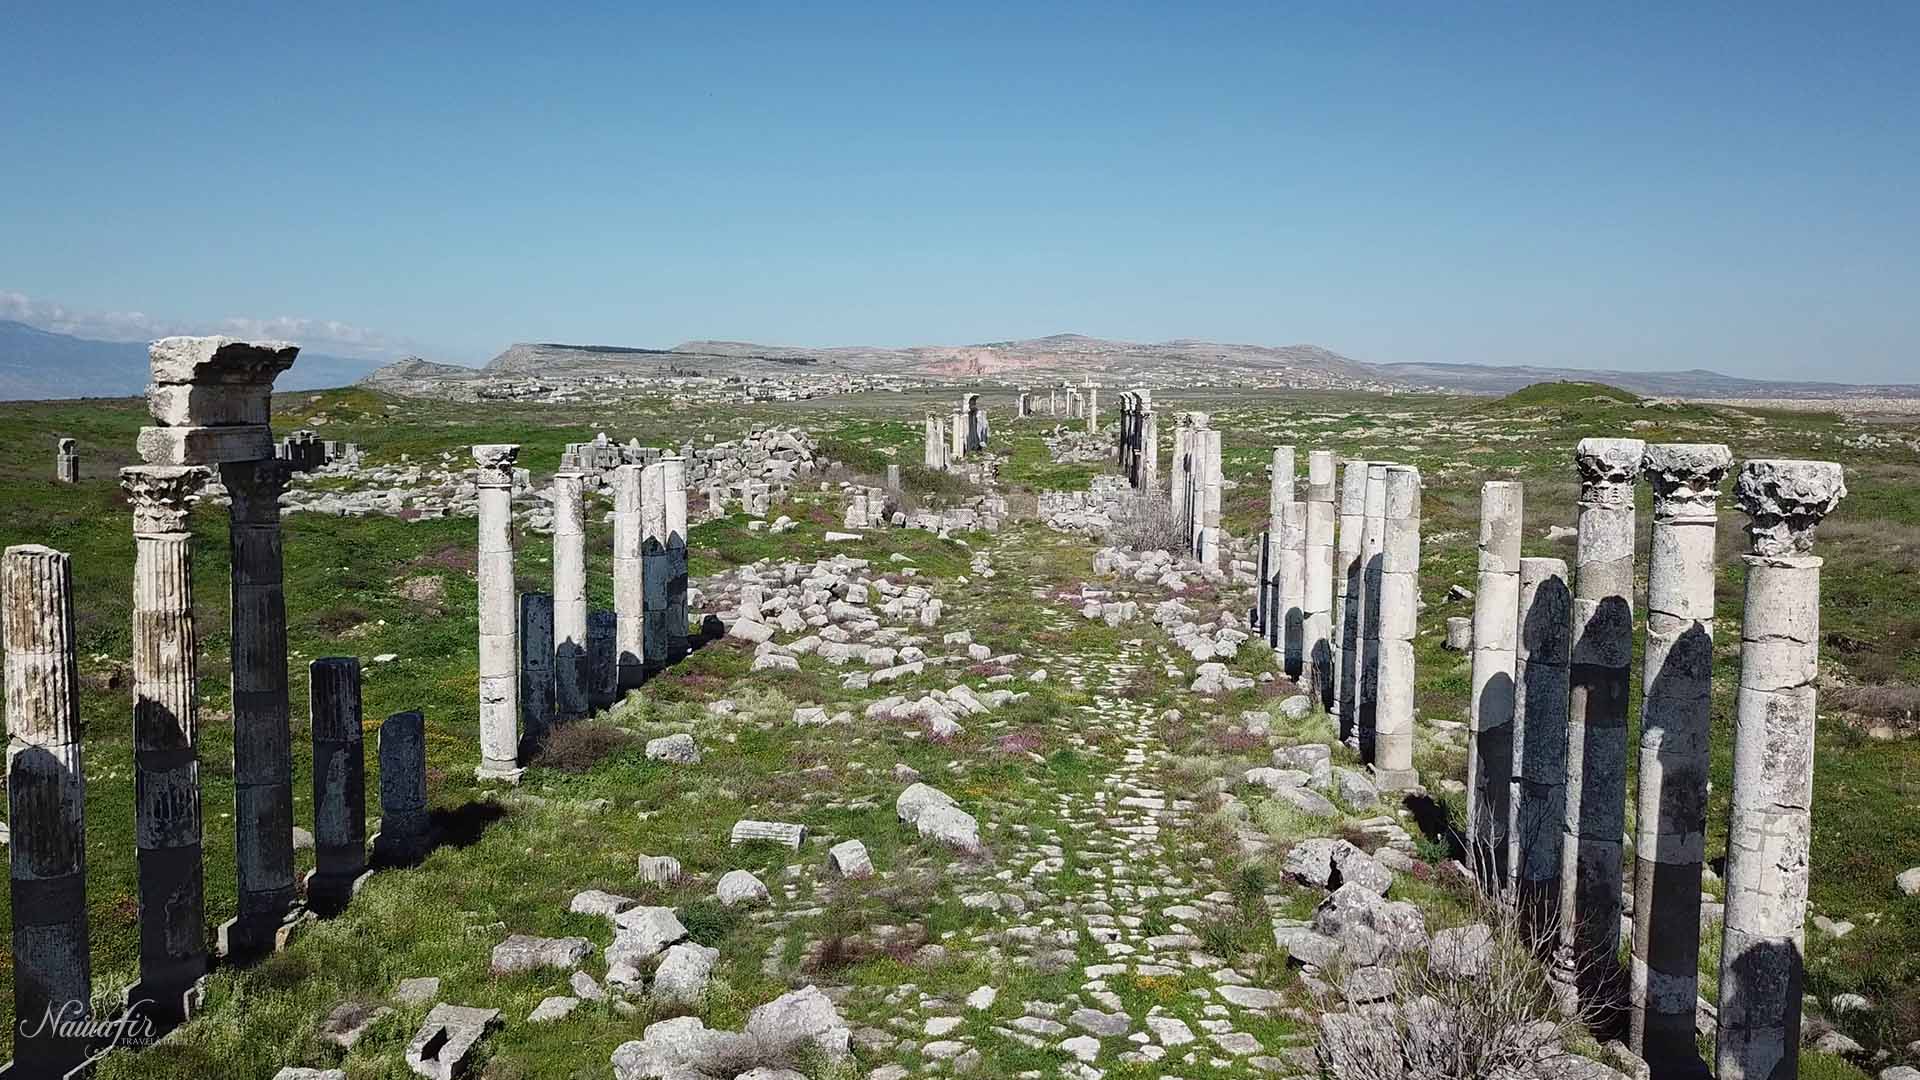 In the photograph, the archaeological site of Apamea is captured, with the backdrop of a serene blue sky adding to its allure.